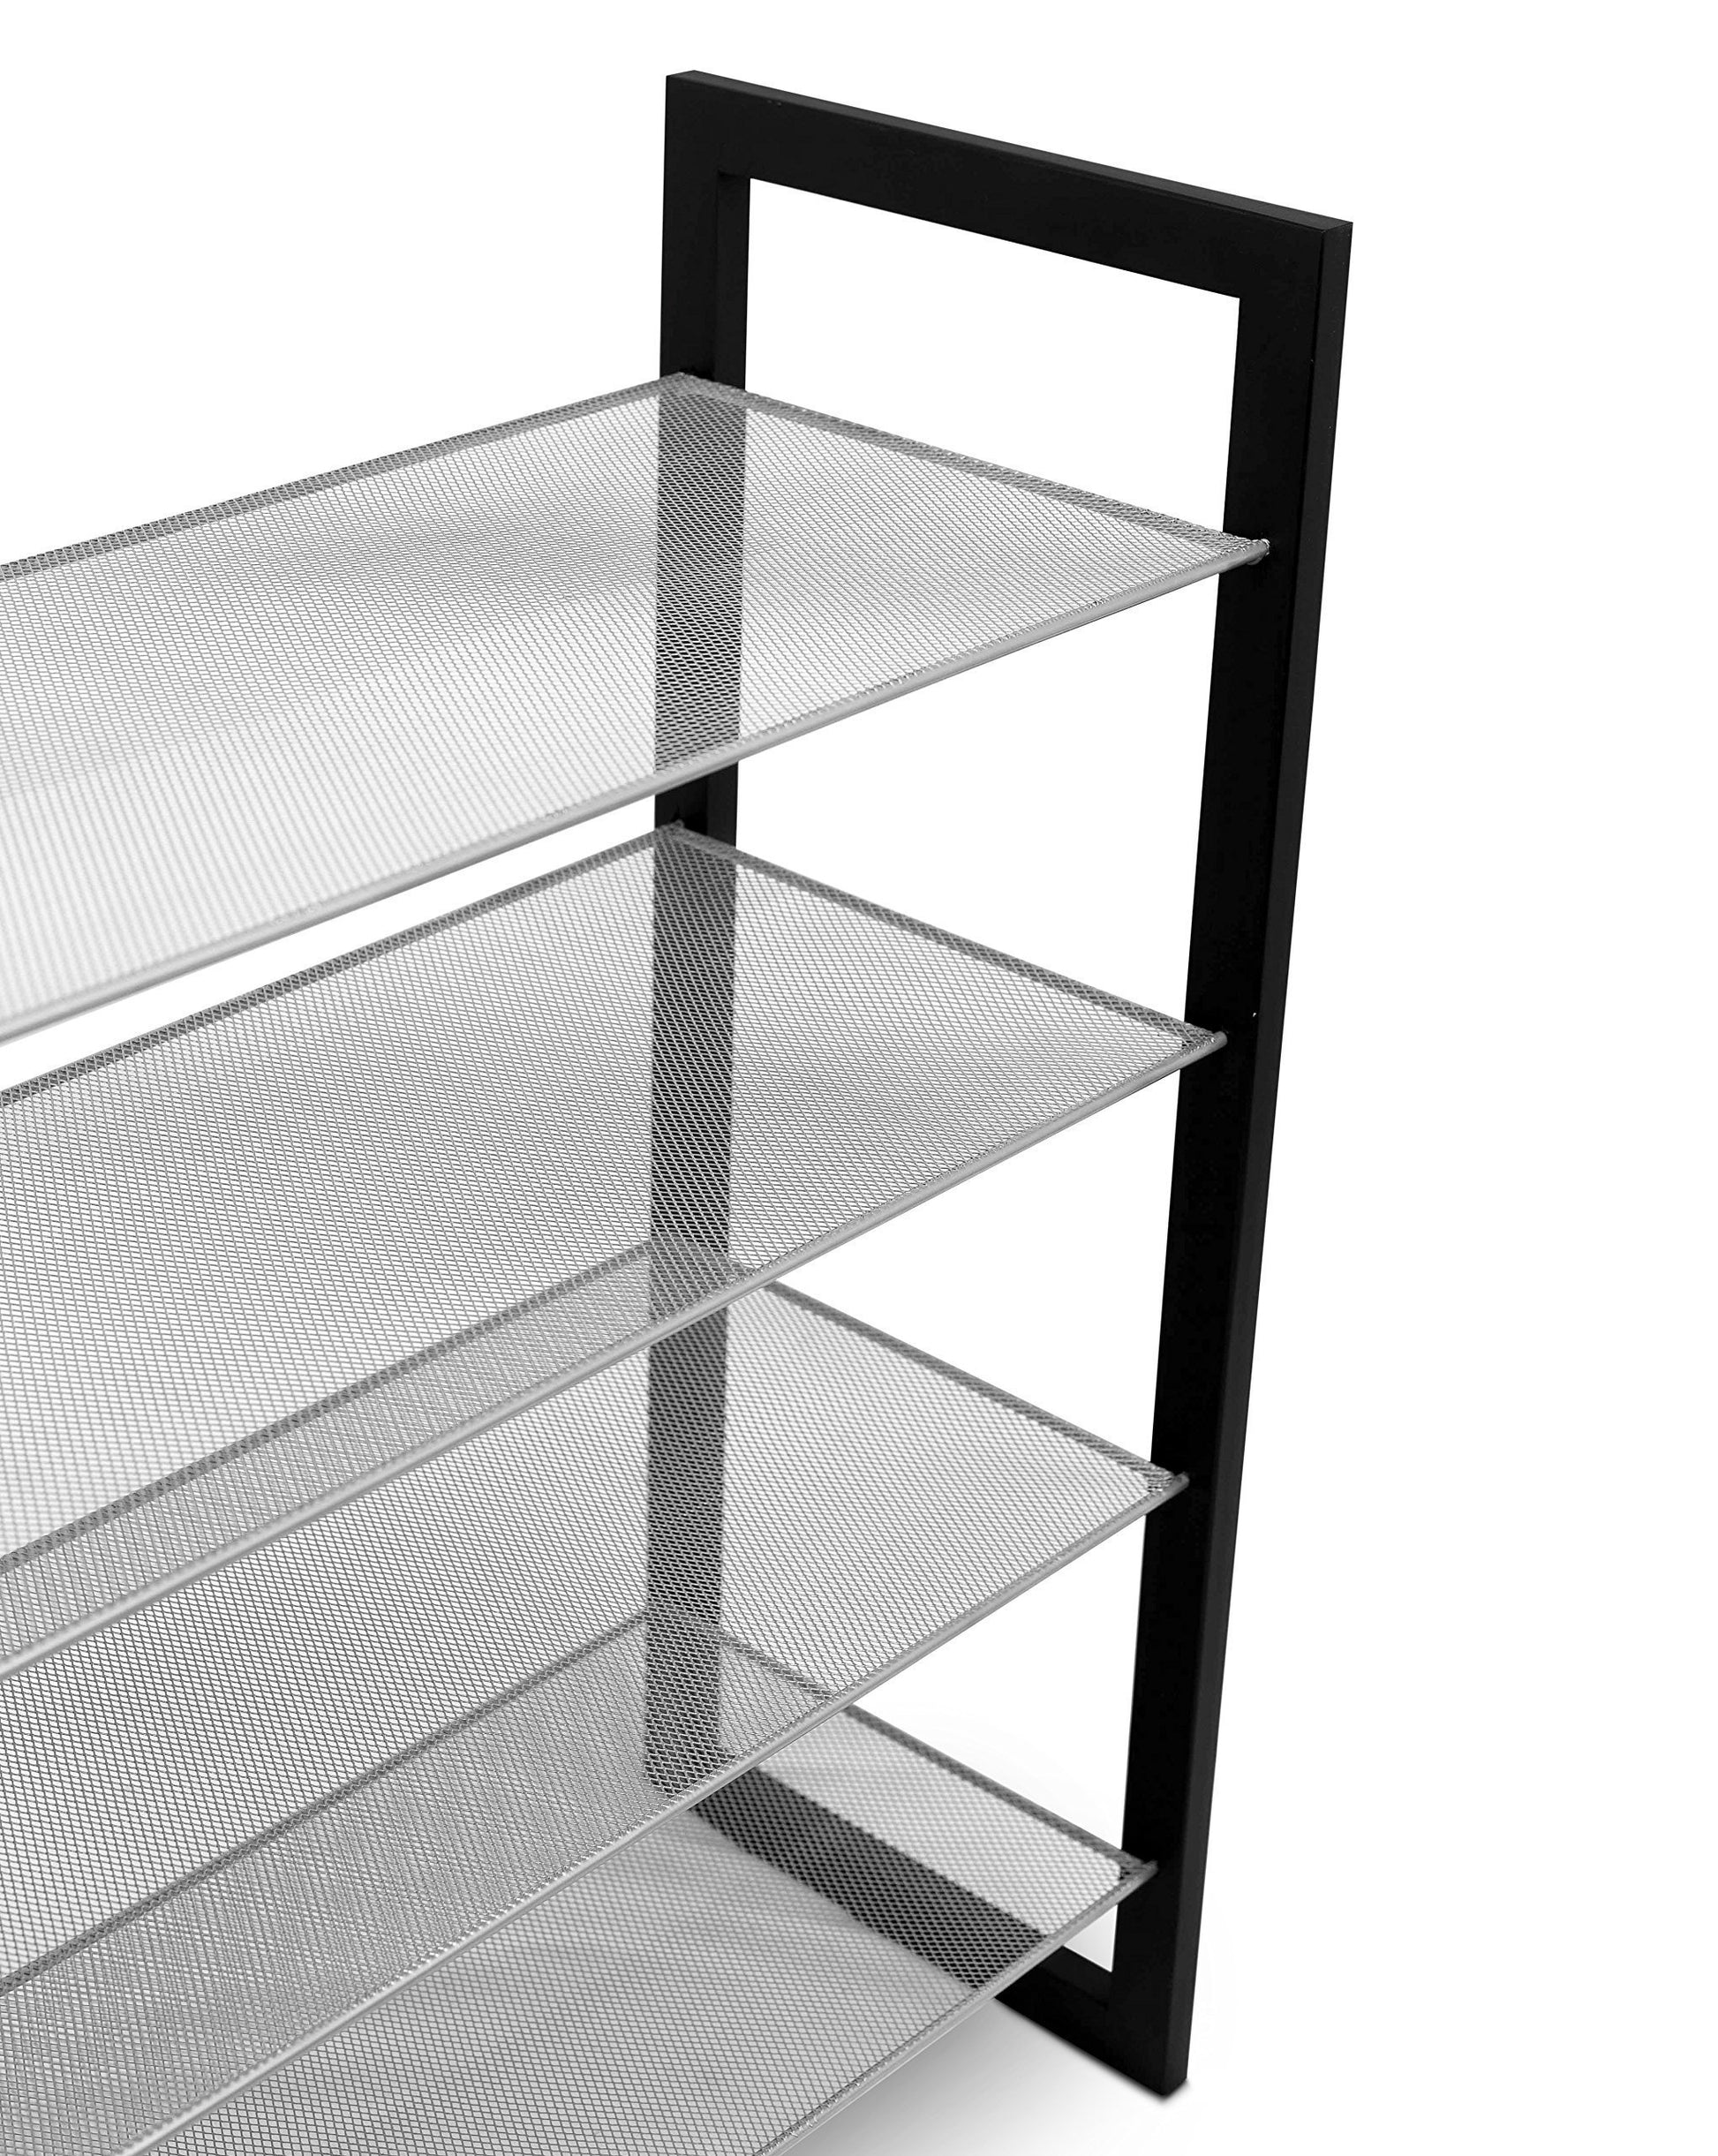 Selection internets best mesh shoe rack 4 tier free standing metal wood shoe organizer closet and entryway fits 16 pairs of shoes black silver